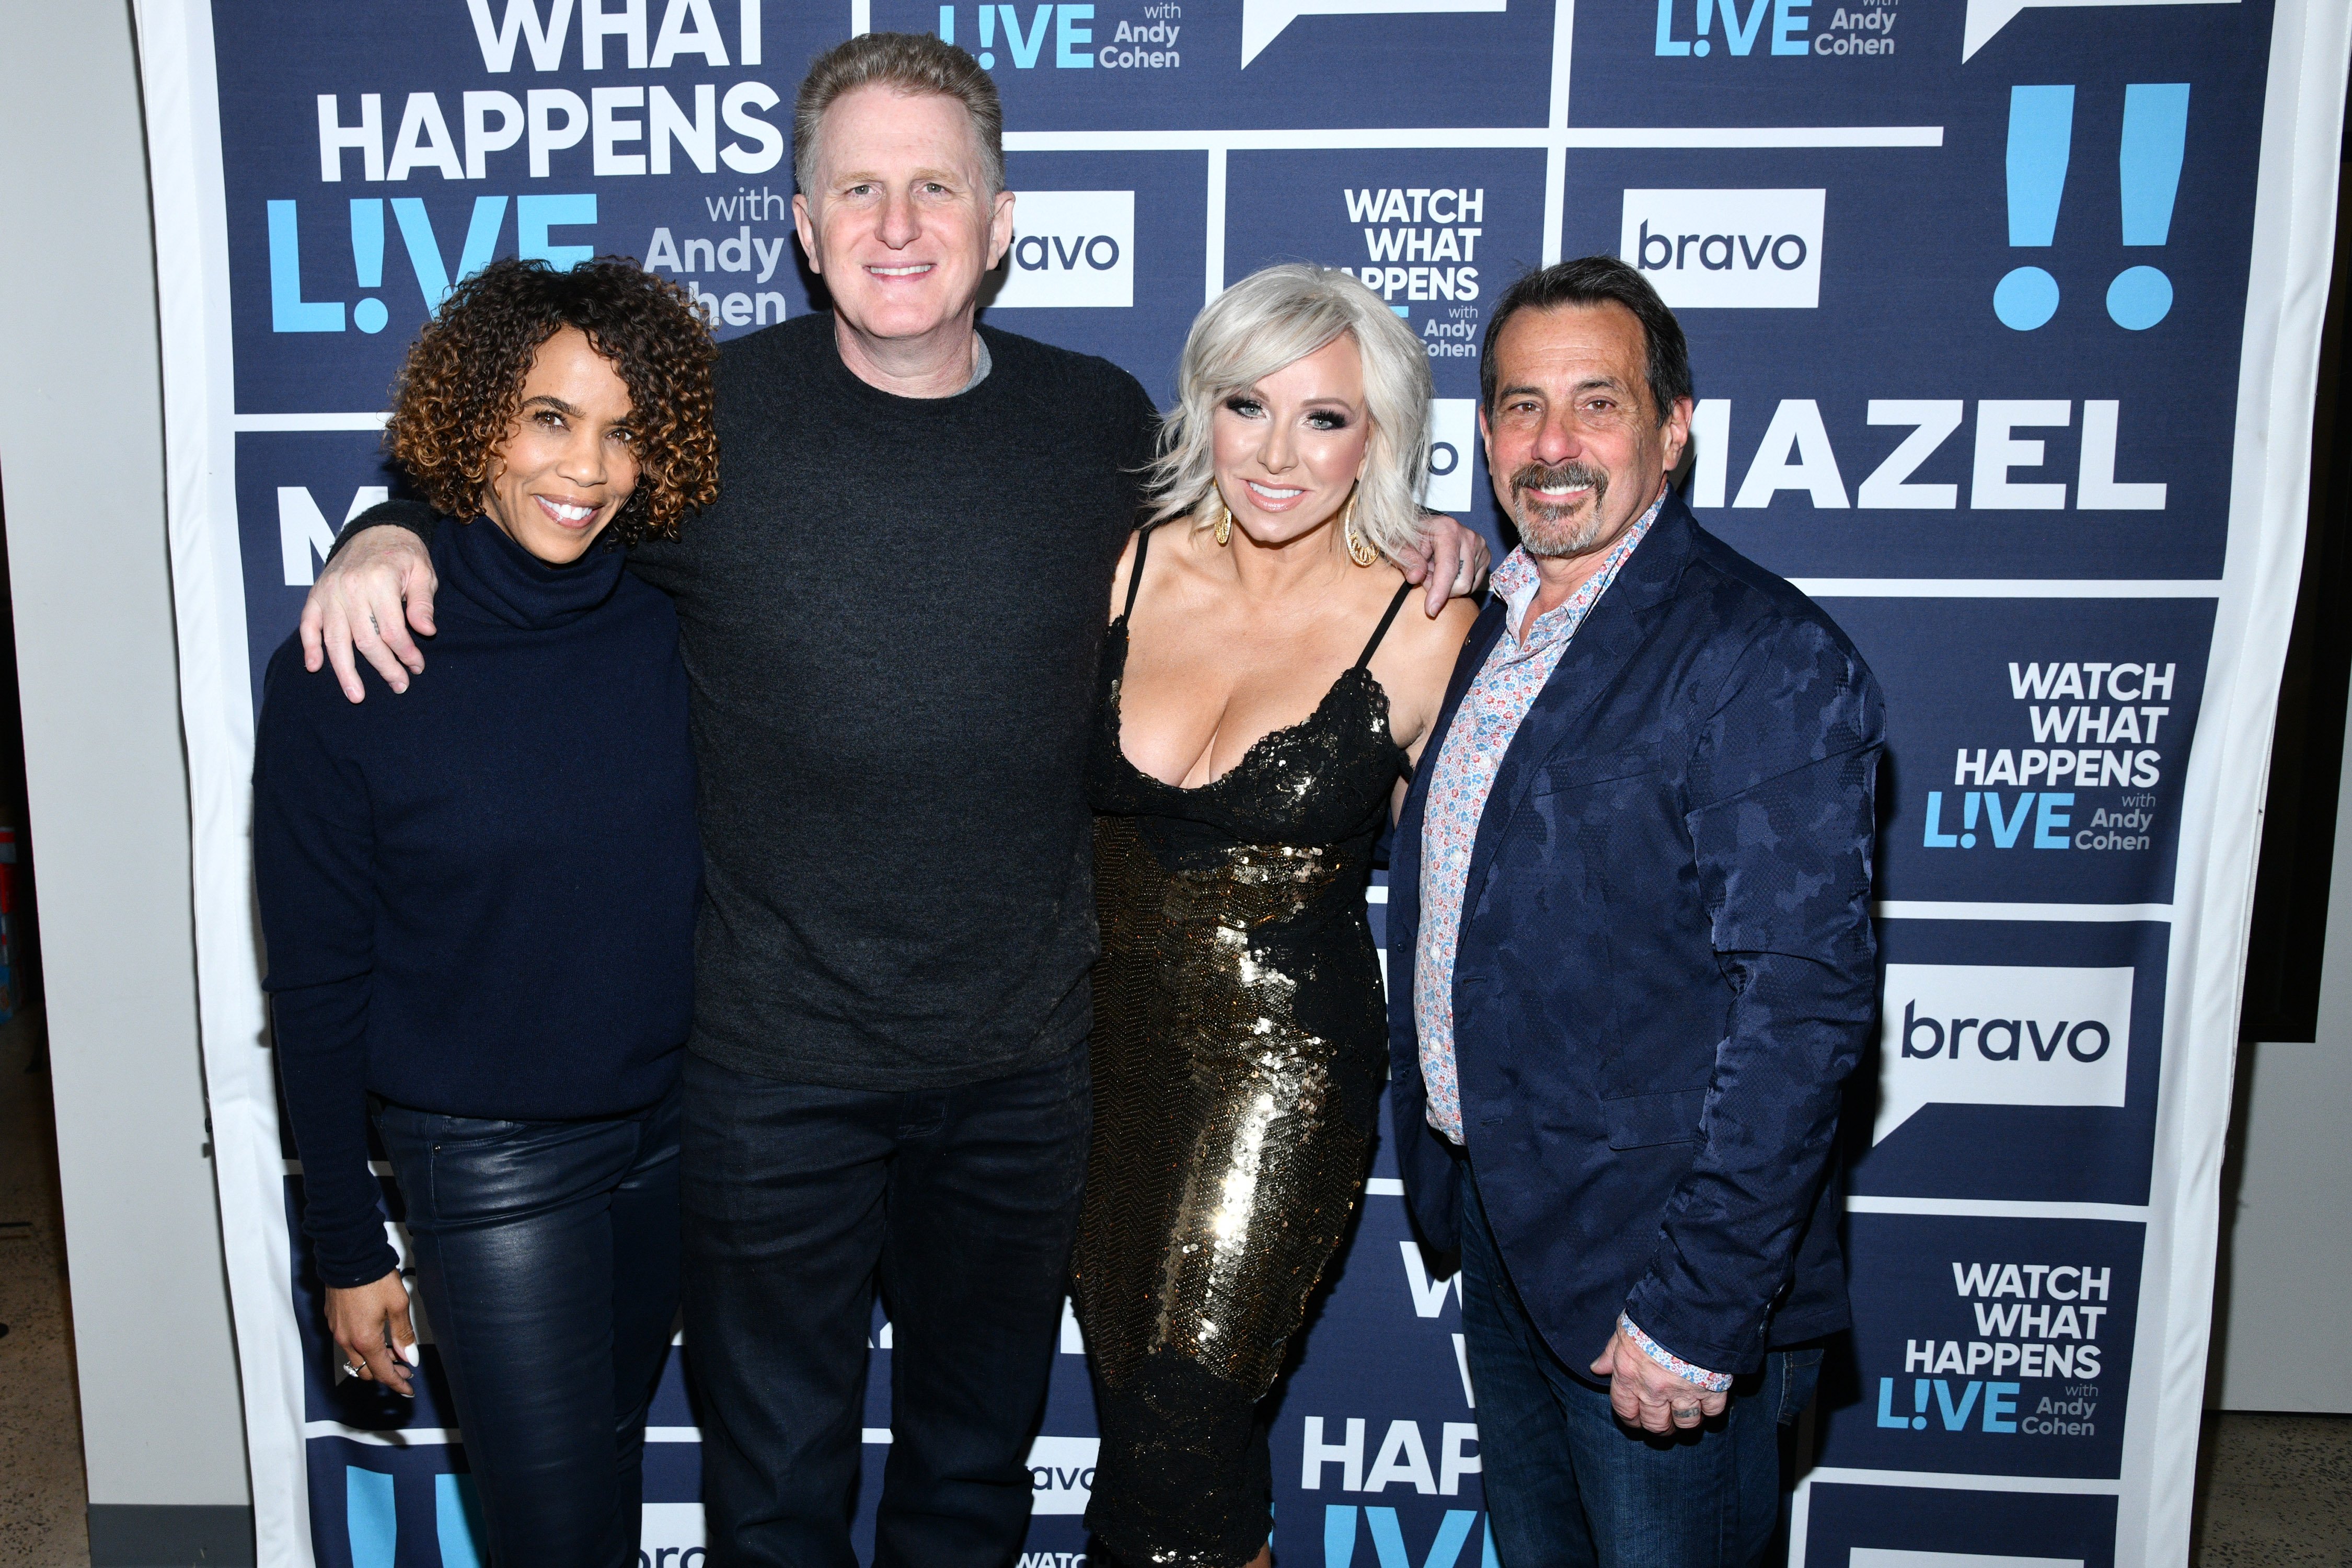 (L-R) Kebe Dunn, Michael Rapaport, Margaret Josephs, and Joe Benigno are pictured on Episode 17037 of "Watch What Happens Live With Andy Cohen" | Source: Getty Images